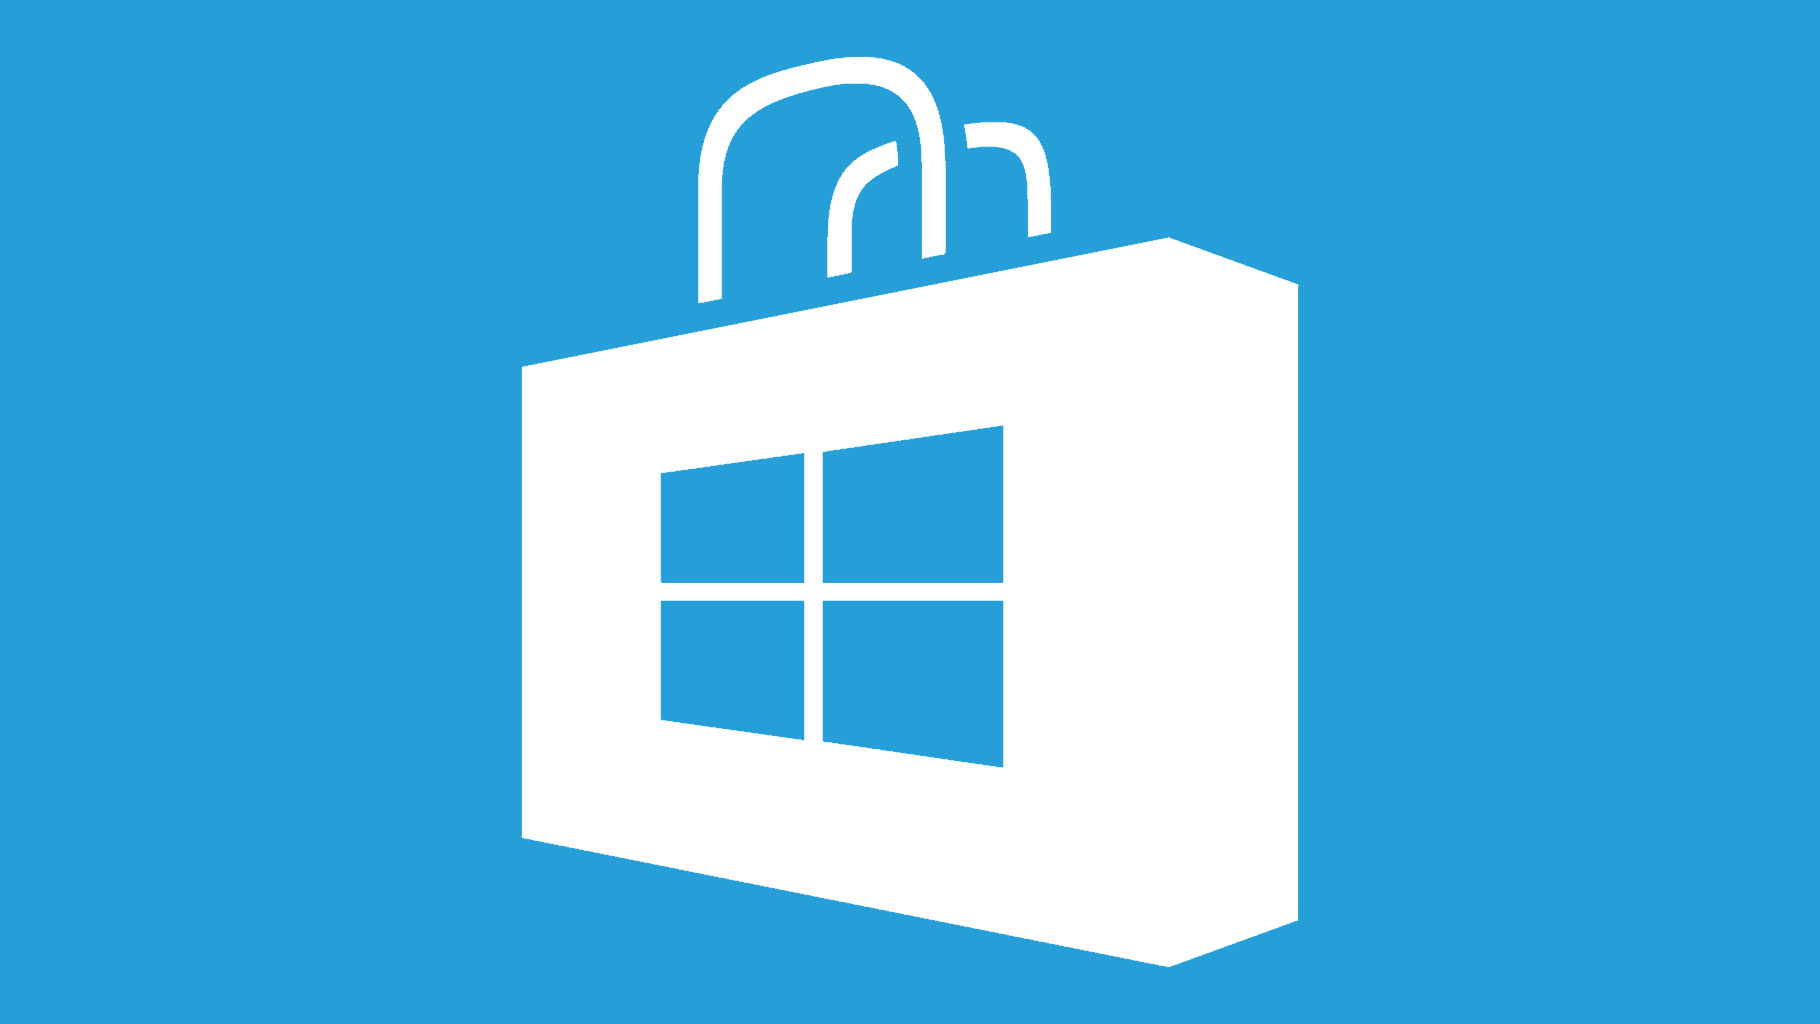 Microsoft Store Logo - Microsoft starts rolling out the rebranded Windows Store in Windows 10